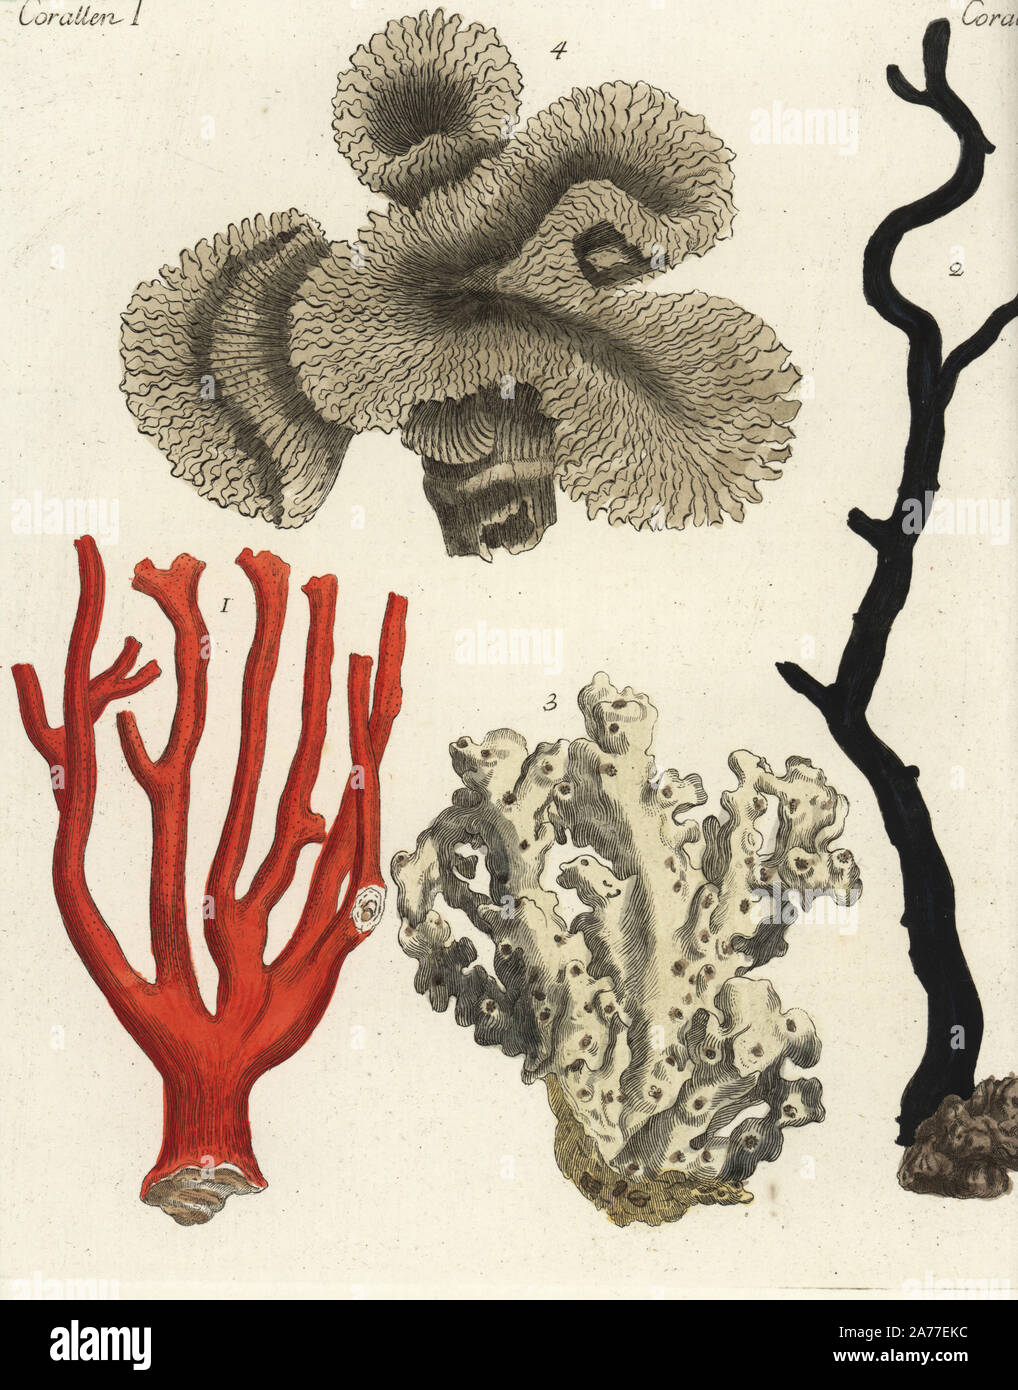 Red coral, Corallium rubrum 1, sea fan, Gorgonia antipathes 2, common white stone coral 3 and staghorn coral, Acropora florida 4. Handcoloured copperplate engraving from Friedrich Johann Bertuch's 'Bilderbuch fur Kinder' (Picture Book for Children), Weimar, 1792. Stock Photo